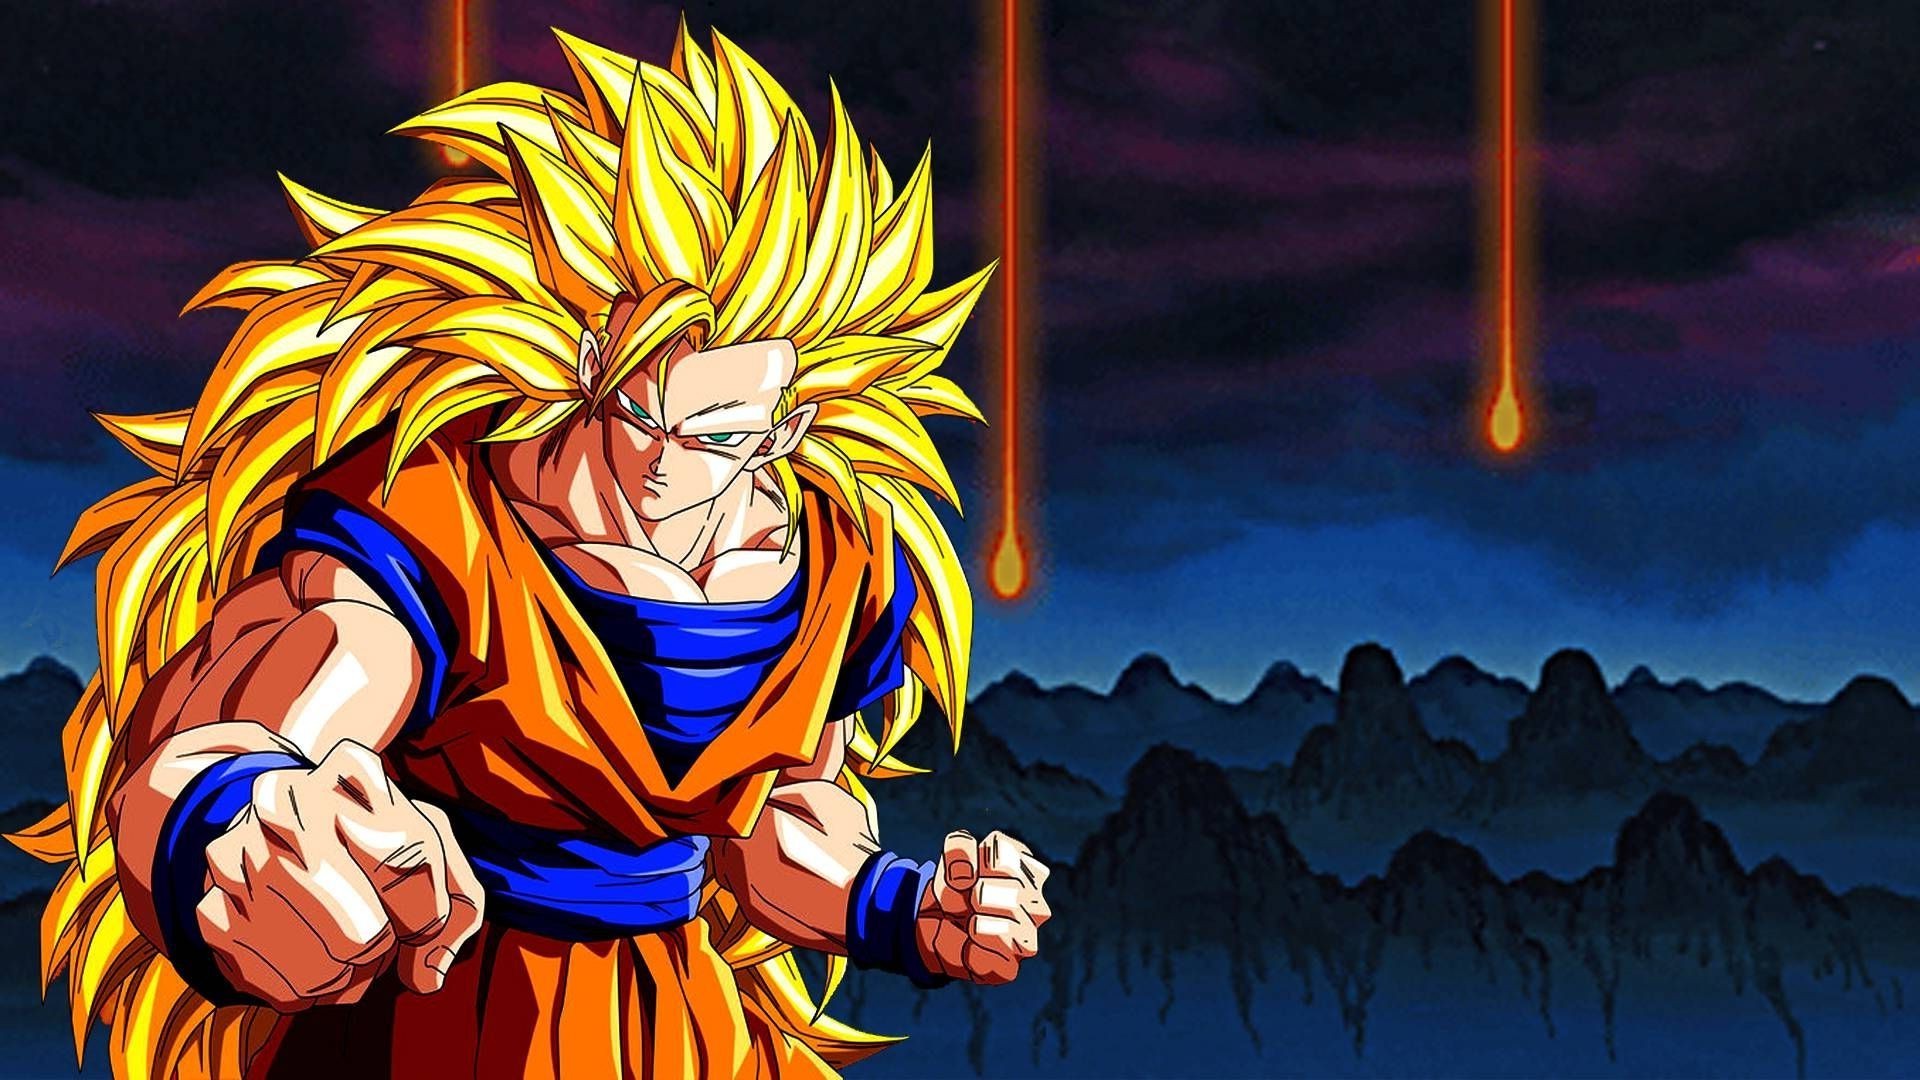 Goku SSJ3 HD Wallpaper with image resolution 1920x1080 pixel. You can make this wallpaper for your Desktop Computer Backgrounds, Mac Wallpapers, Android Lock screen or iPhone Screensavers